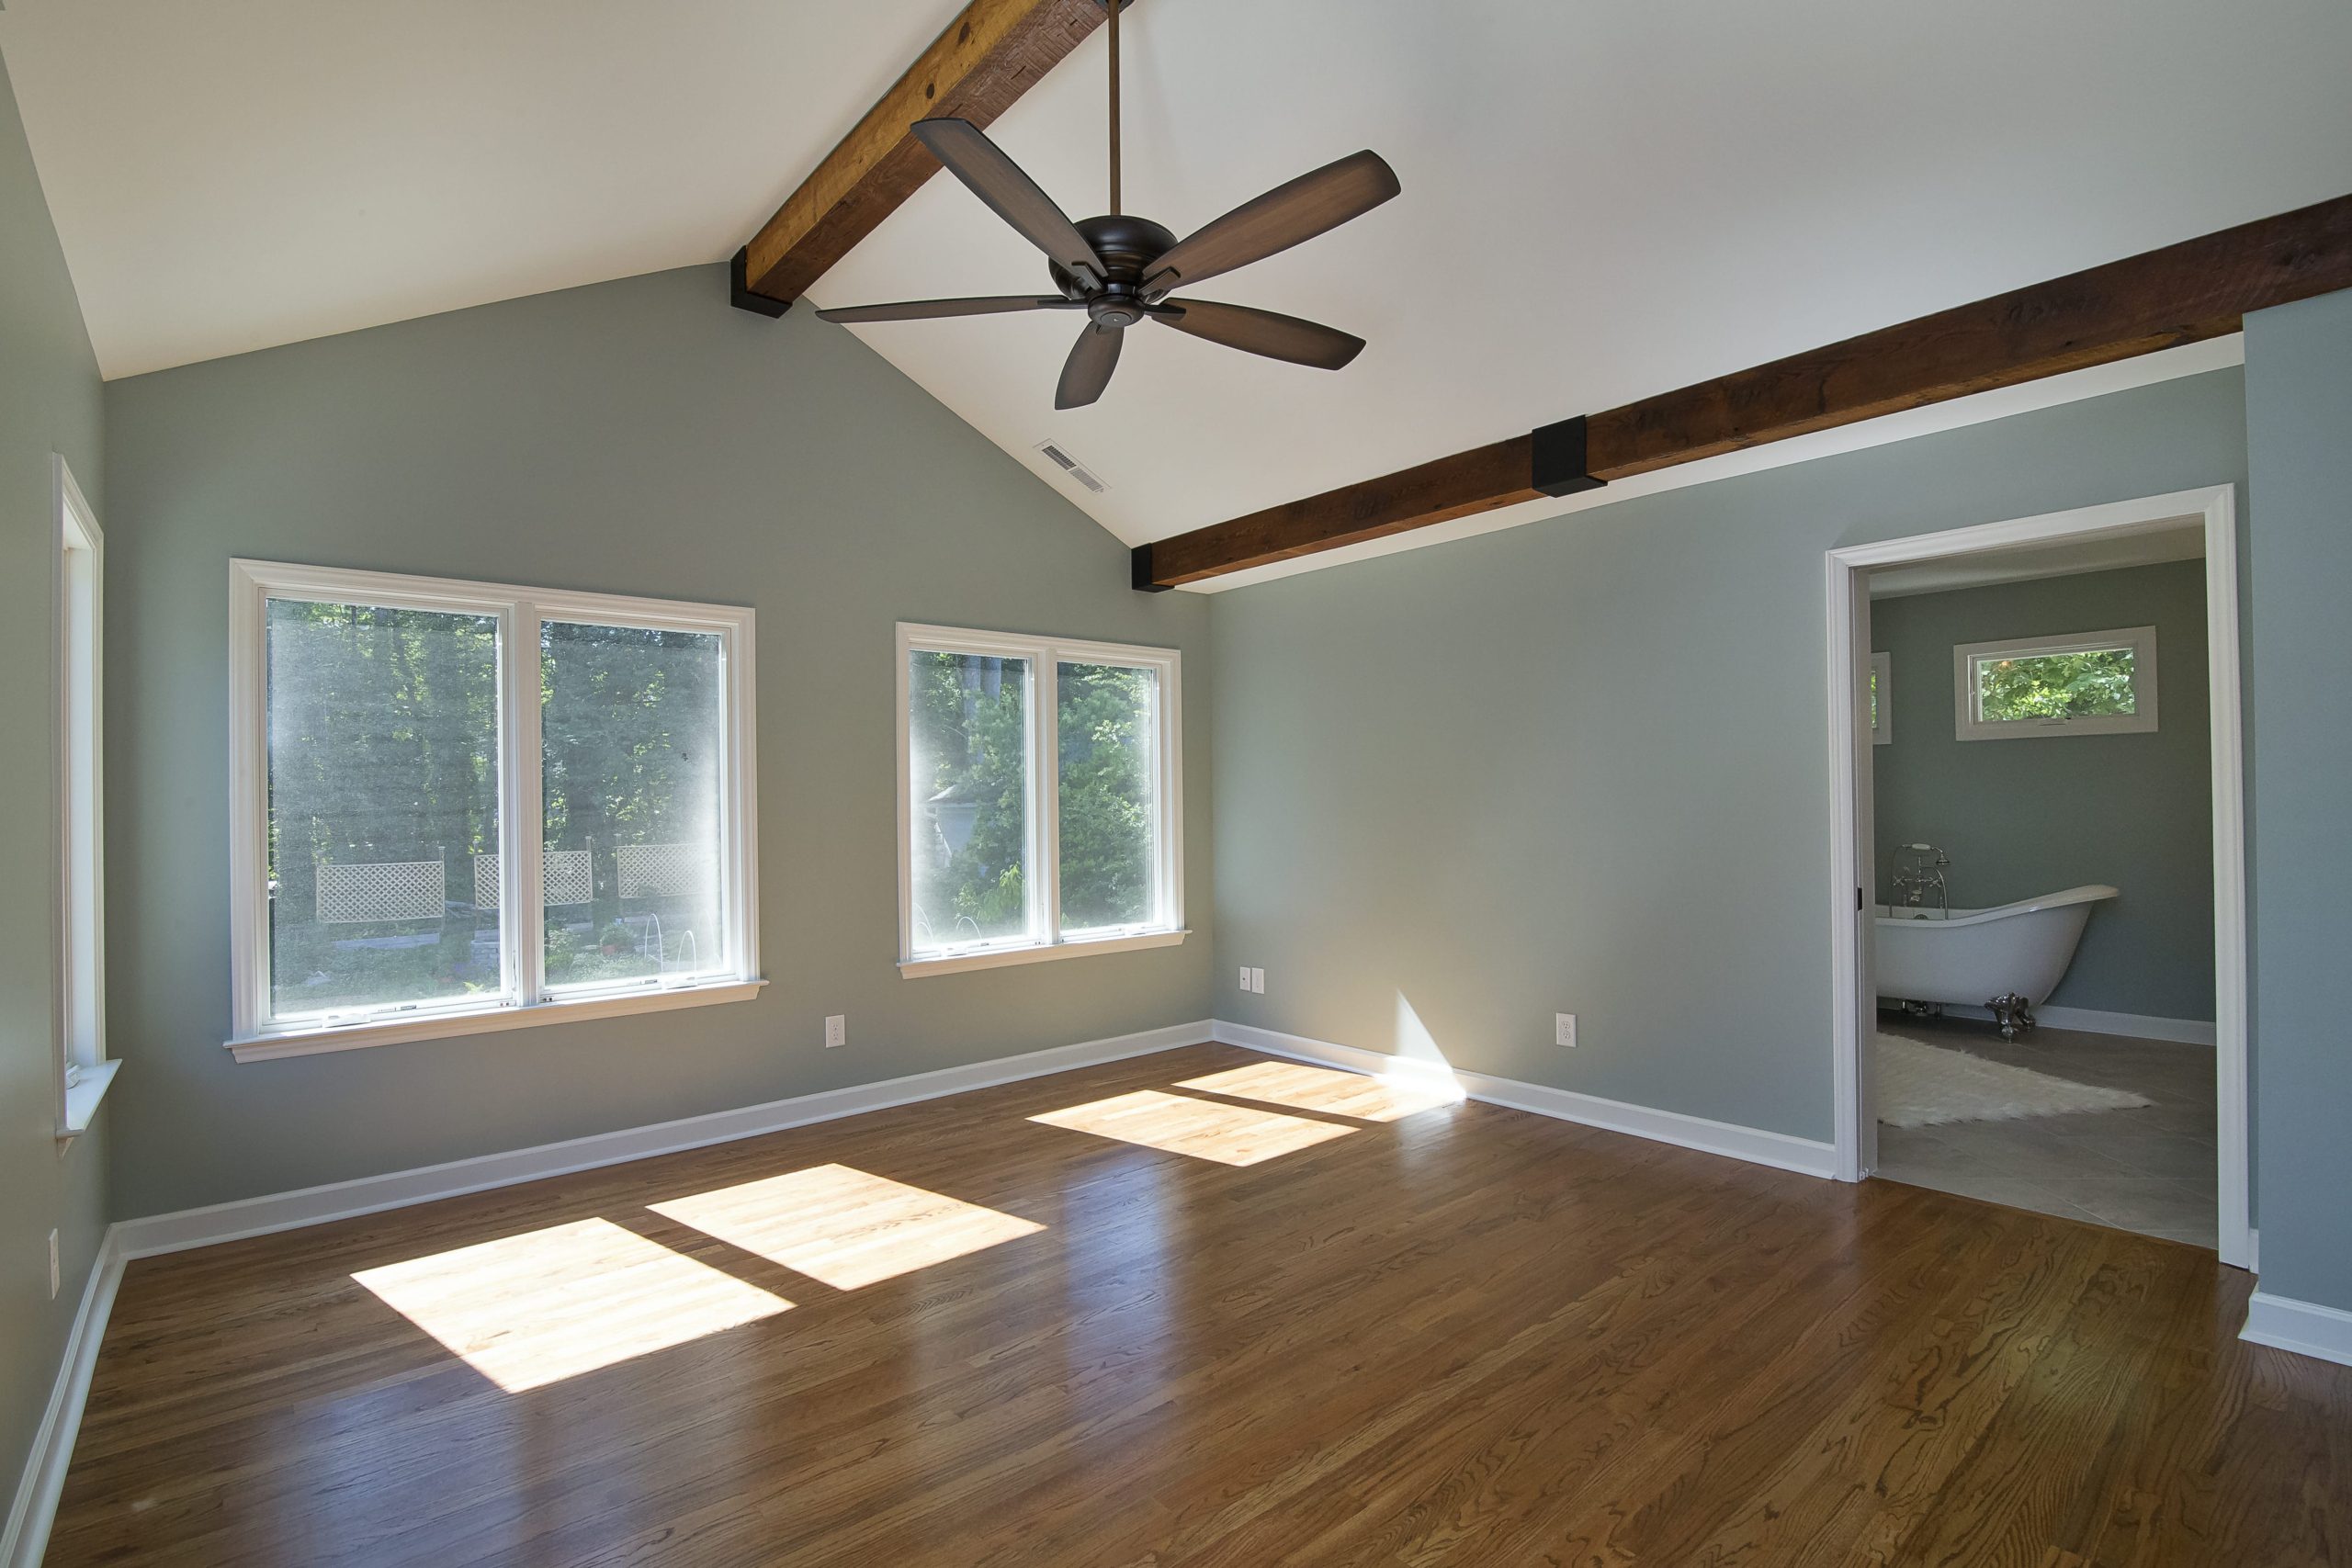 Primary suite with exposed wood beams and warm hardwood floors is illuminated by beams of sunlight through large windows